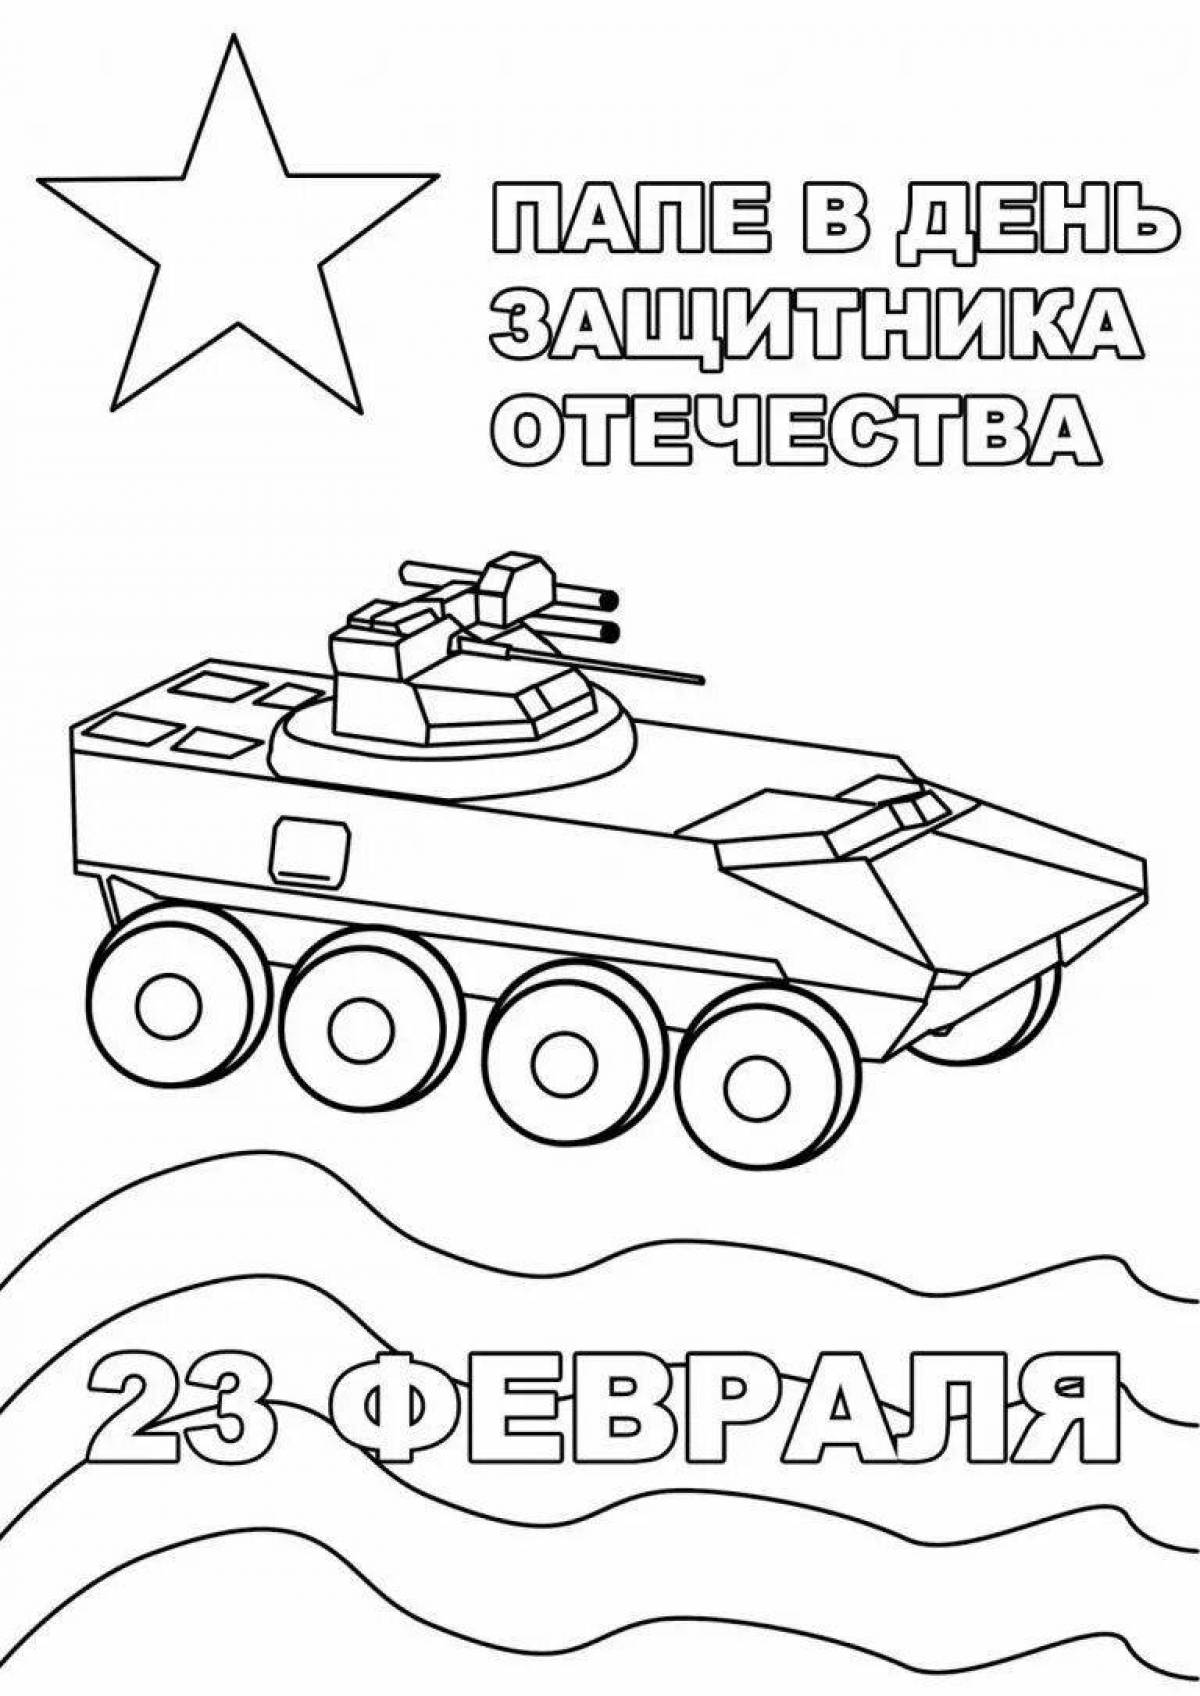 Playful defender of the fatherland coloring book for children